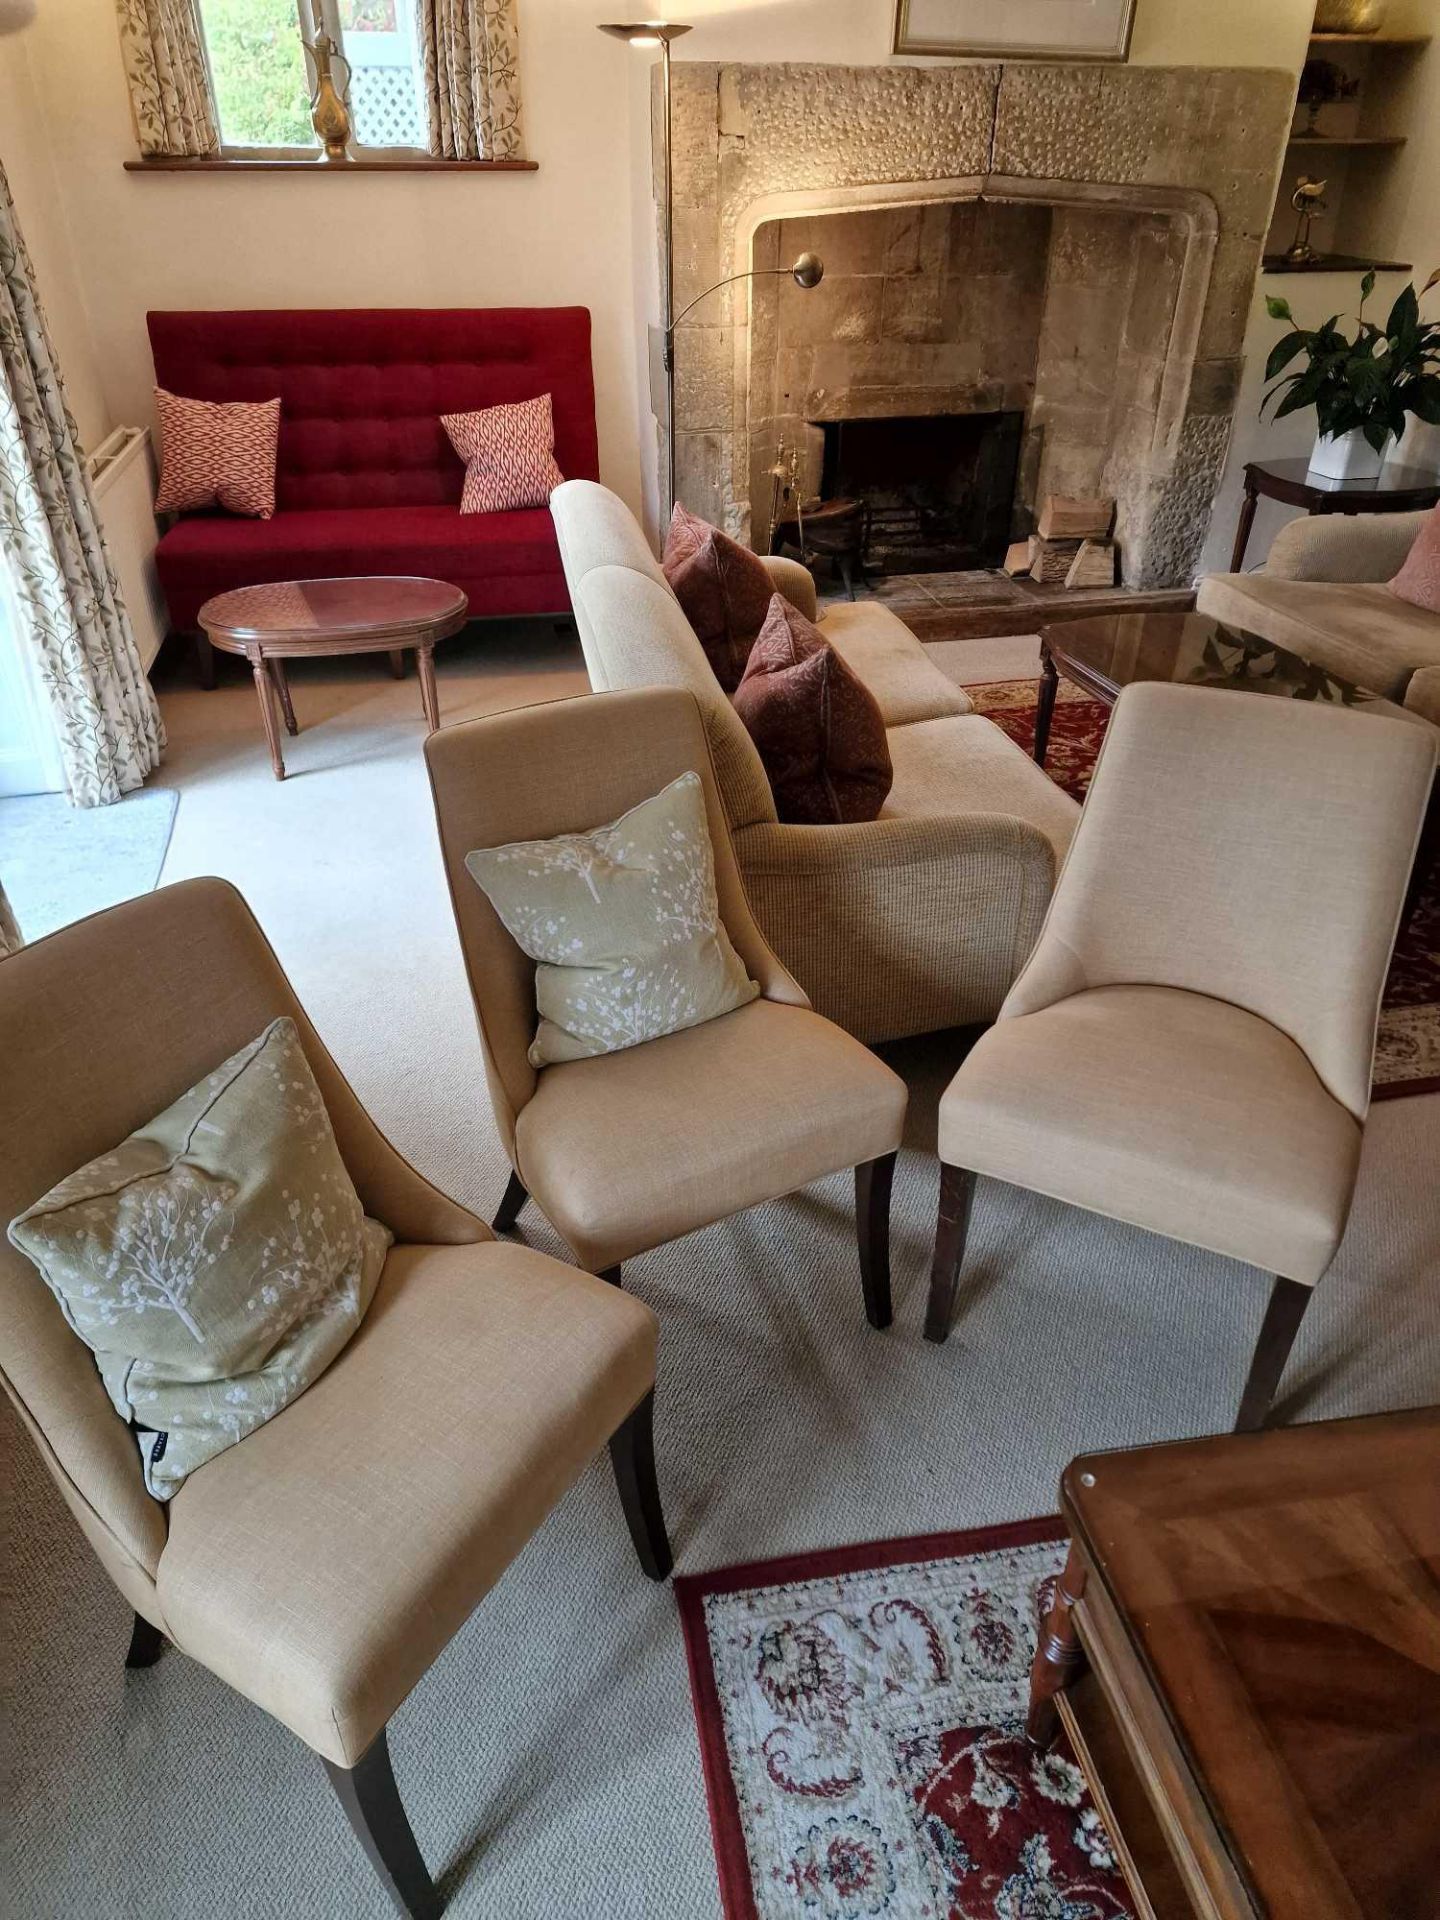 A Set Of 3 X Bourne Furniture 'Stylish Chair' Upholstered In Harlequin Makeda Straw 6226 Taupe.